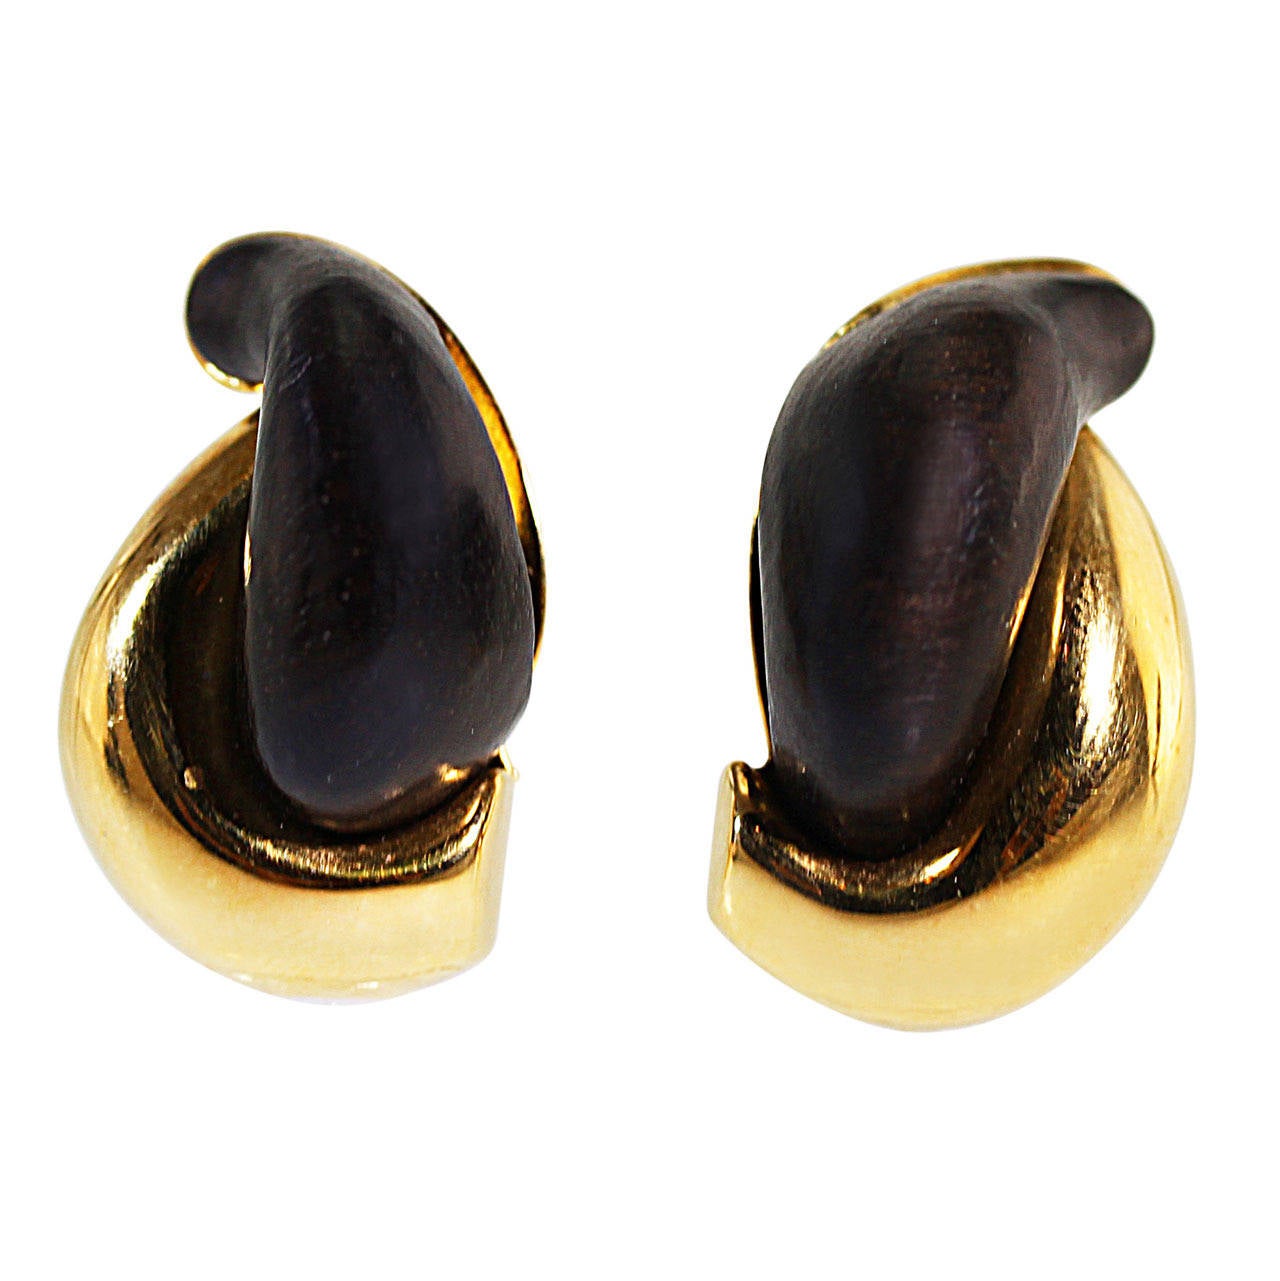 Seaman Schepps Carved Wood and Gold Earclips